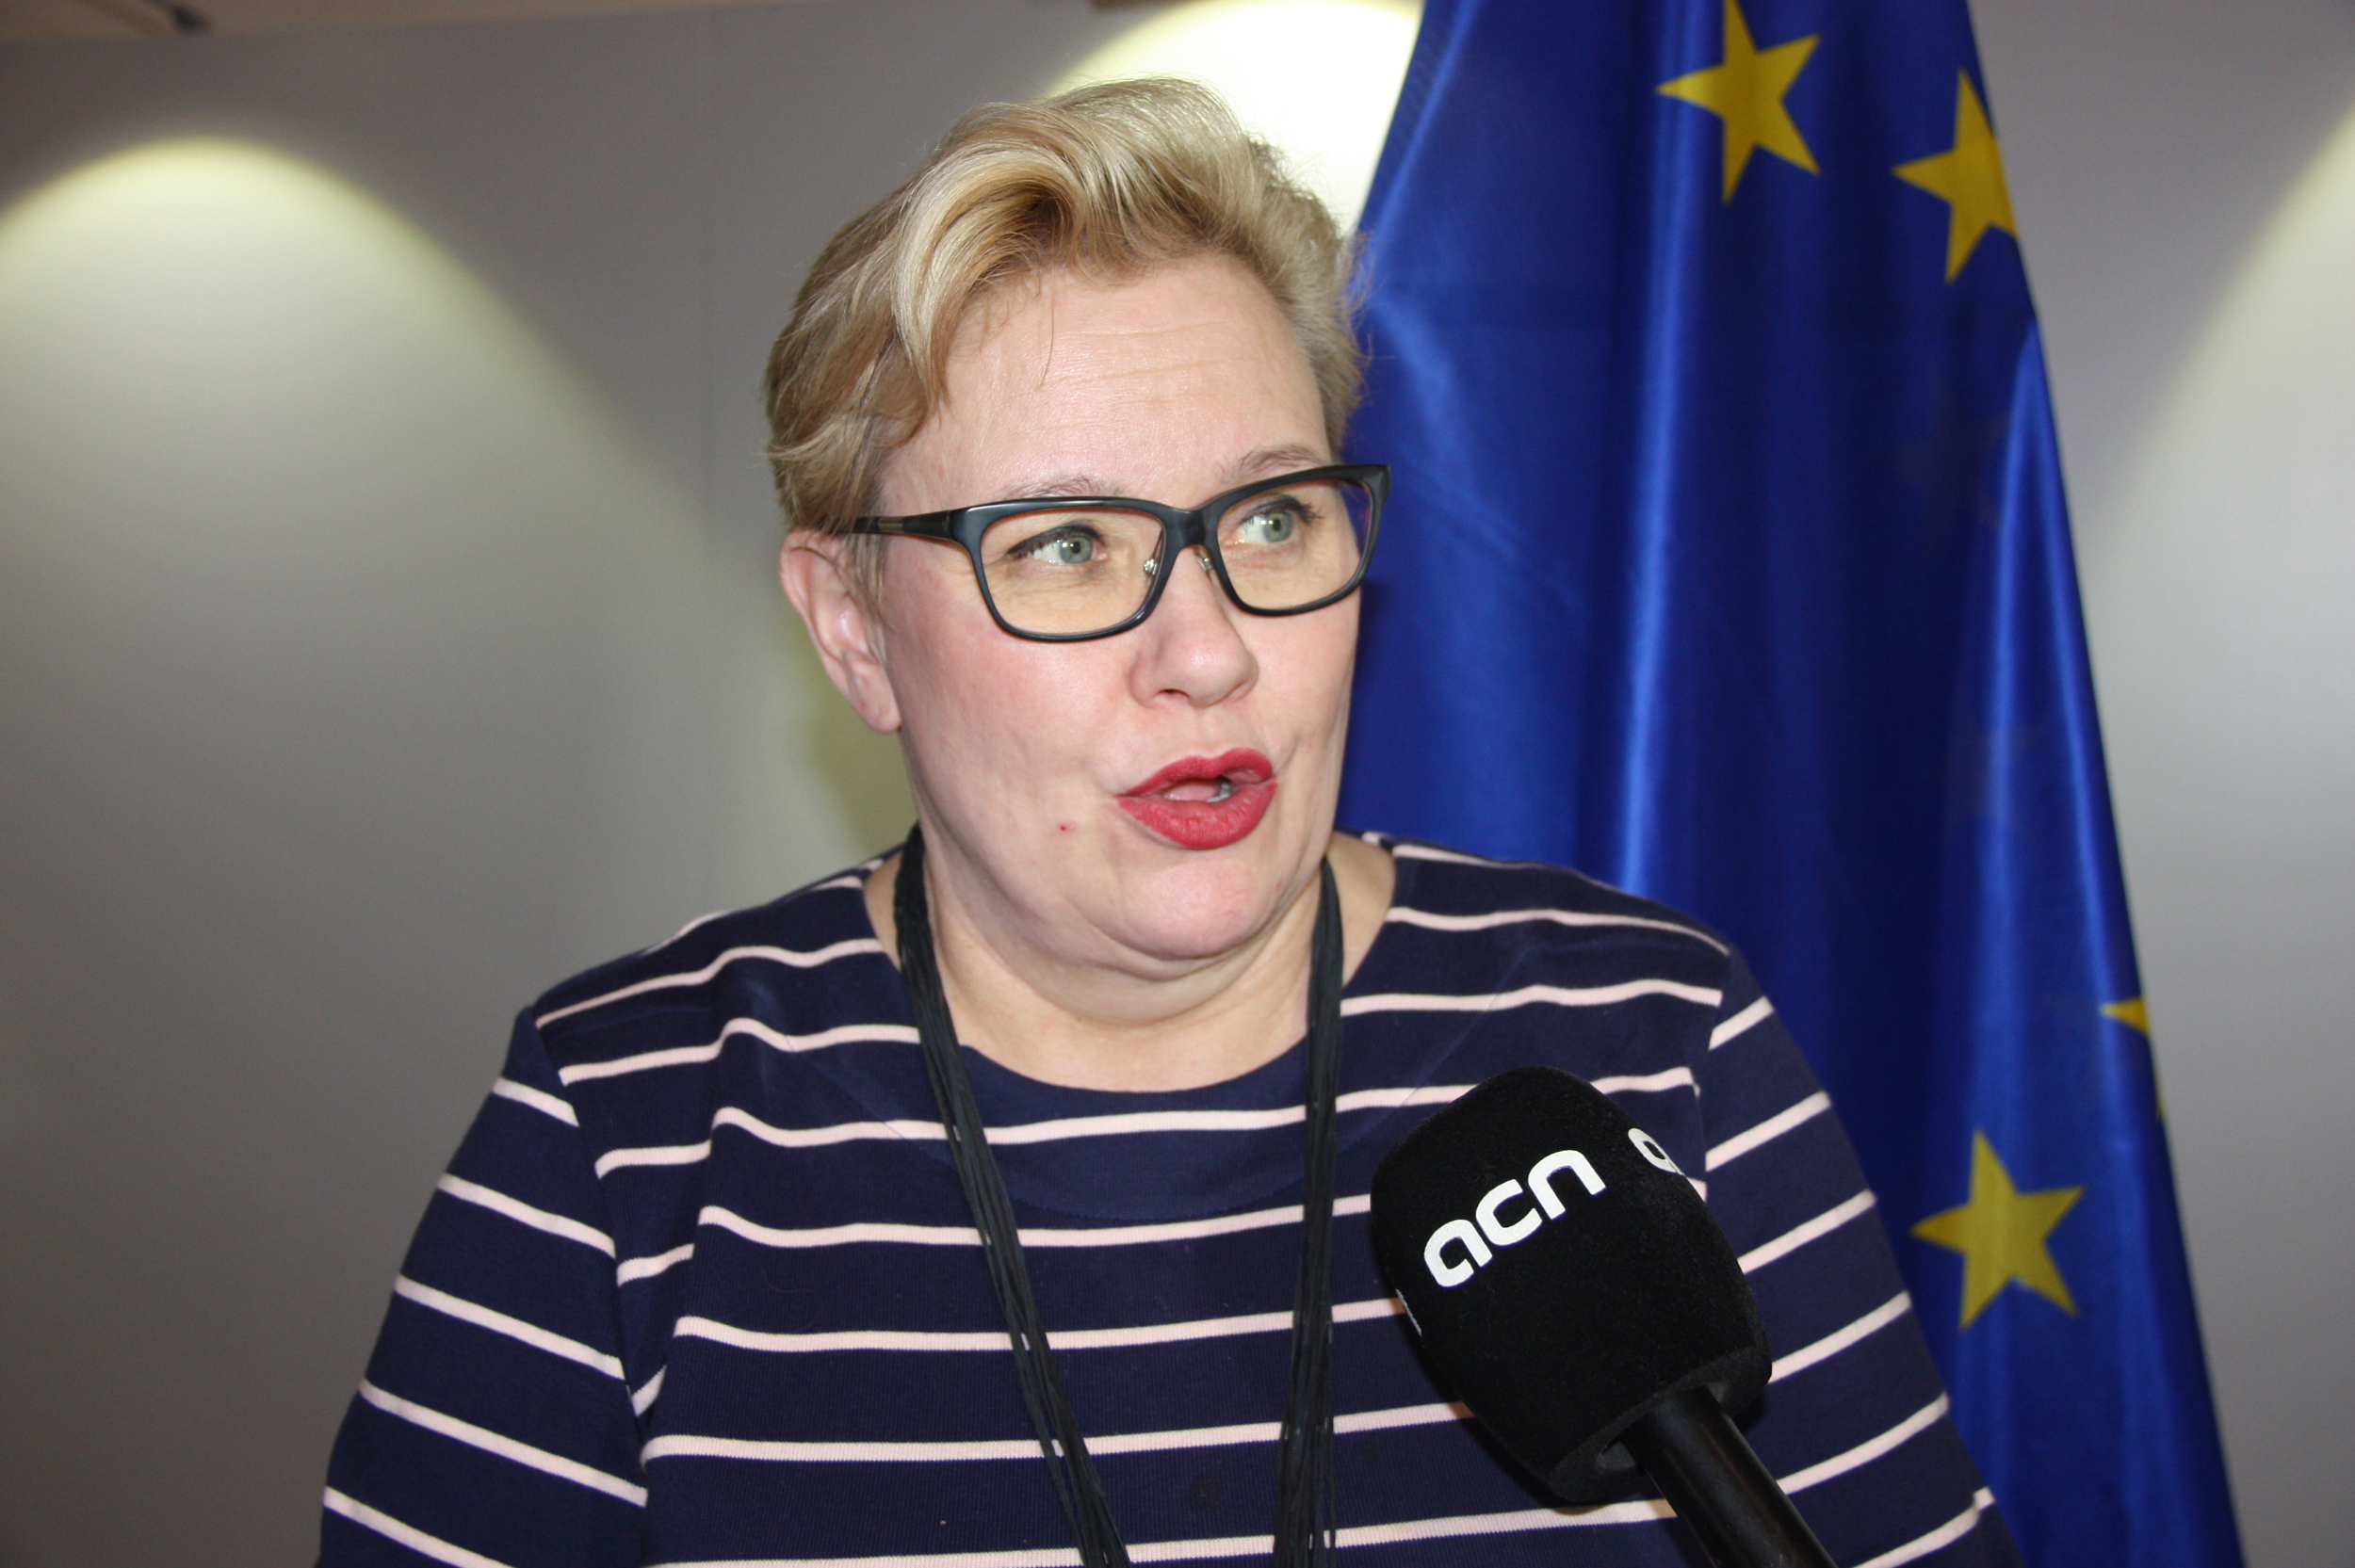 European Peoples’ Party (EPP) MEP, Sirpa Pietikainen, interviewed by the CNA (by ACN)